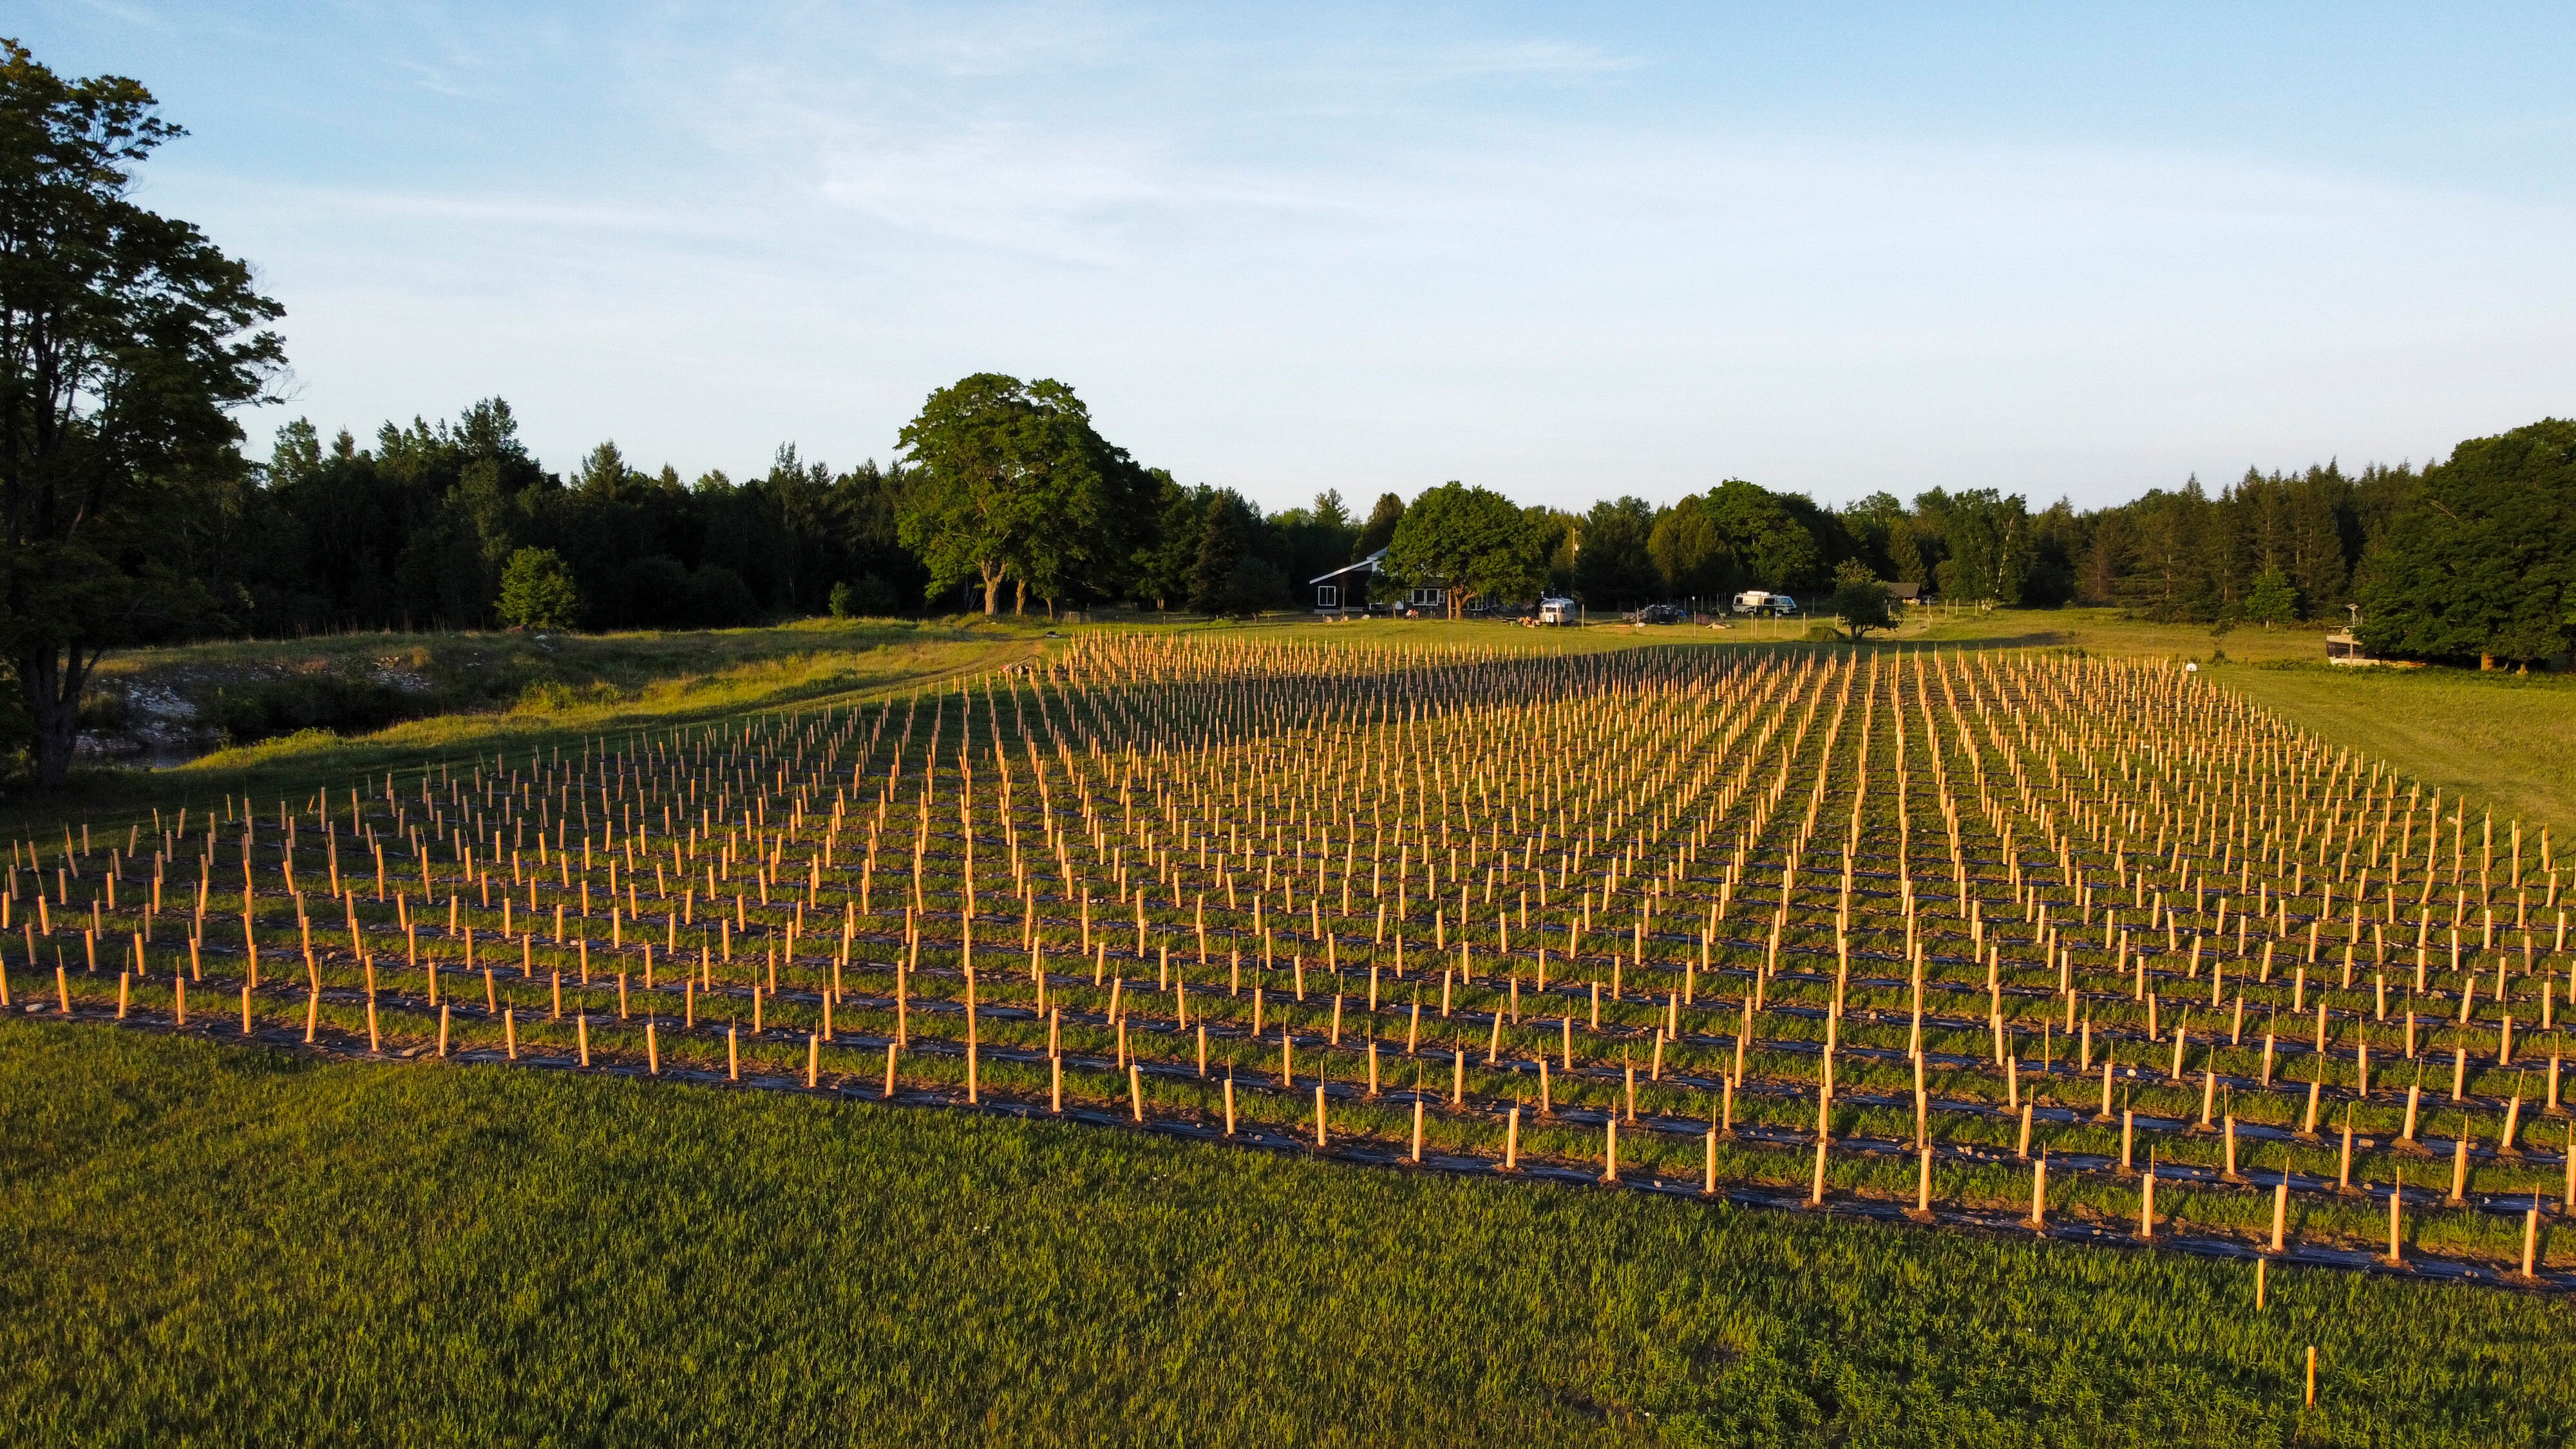 An elevated view of the first field in the vineyard, referred to as “Antho 1” where Adam Kendall and Kate Leese have planted 2,100 vines, shown here protected by grow tubes.